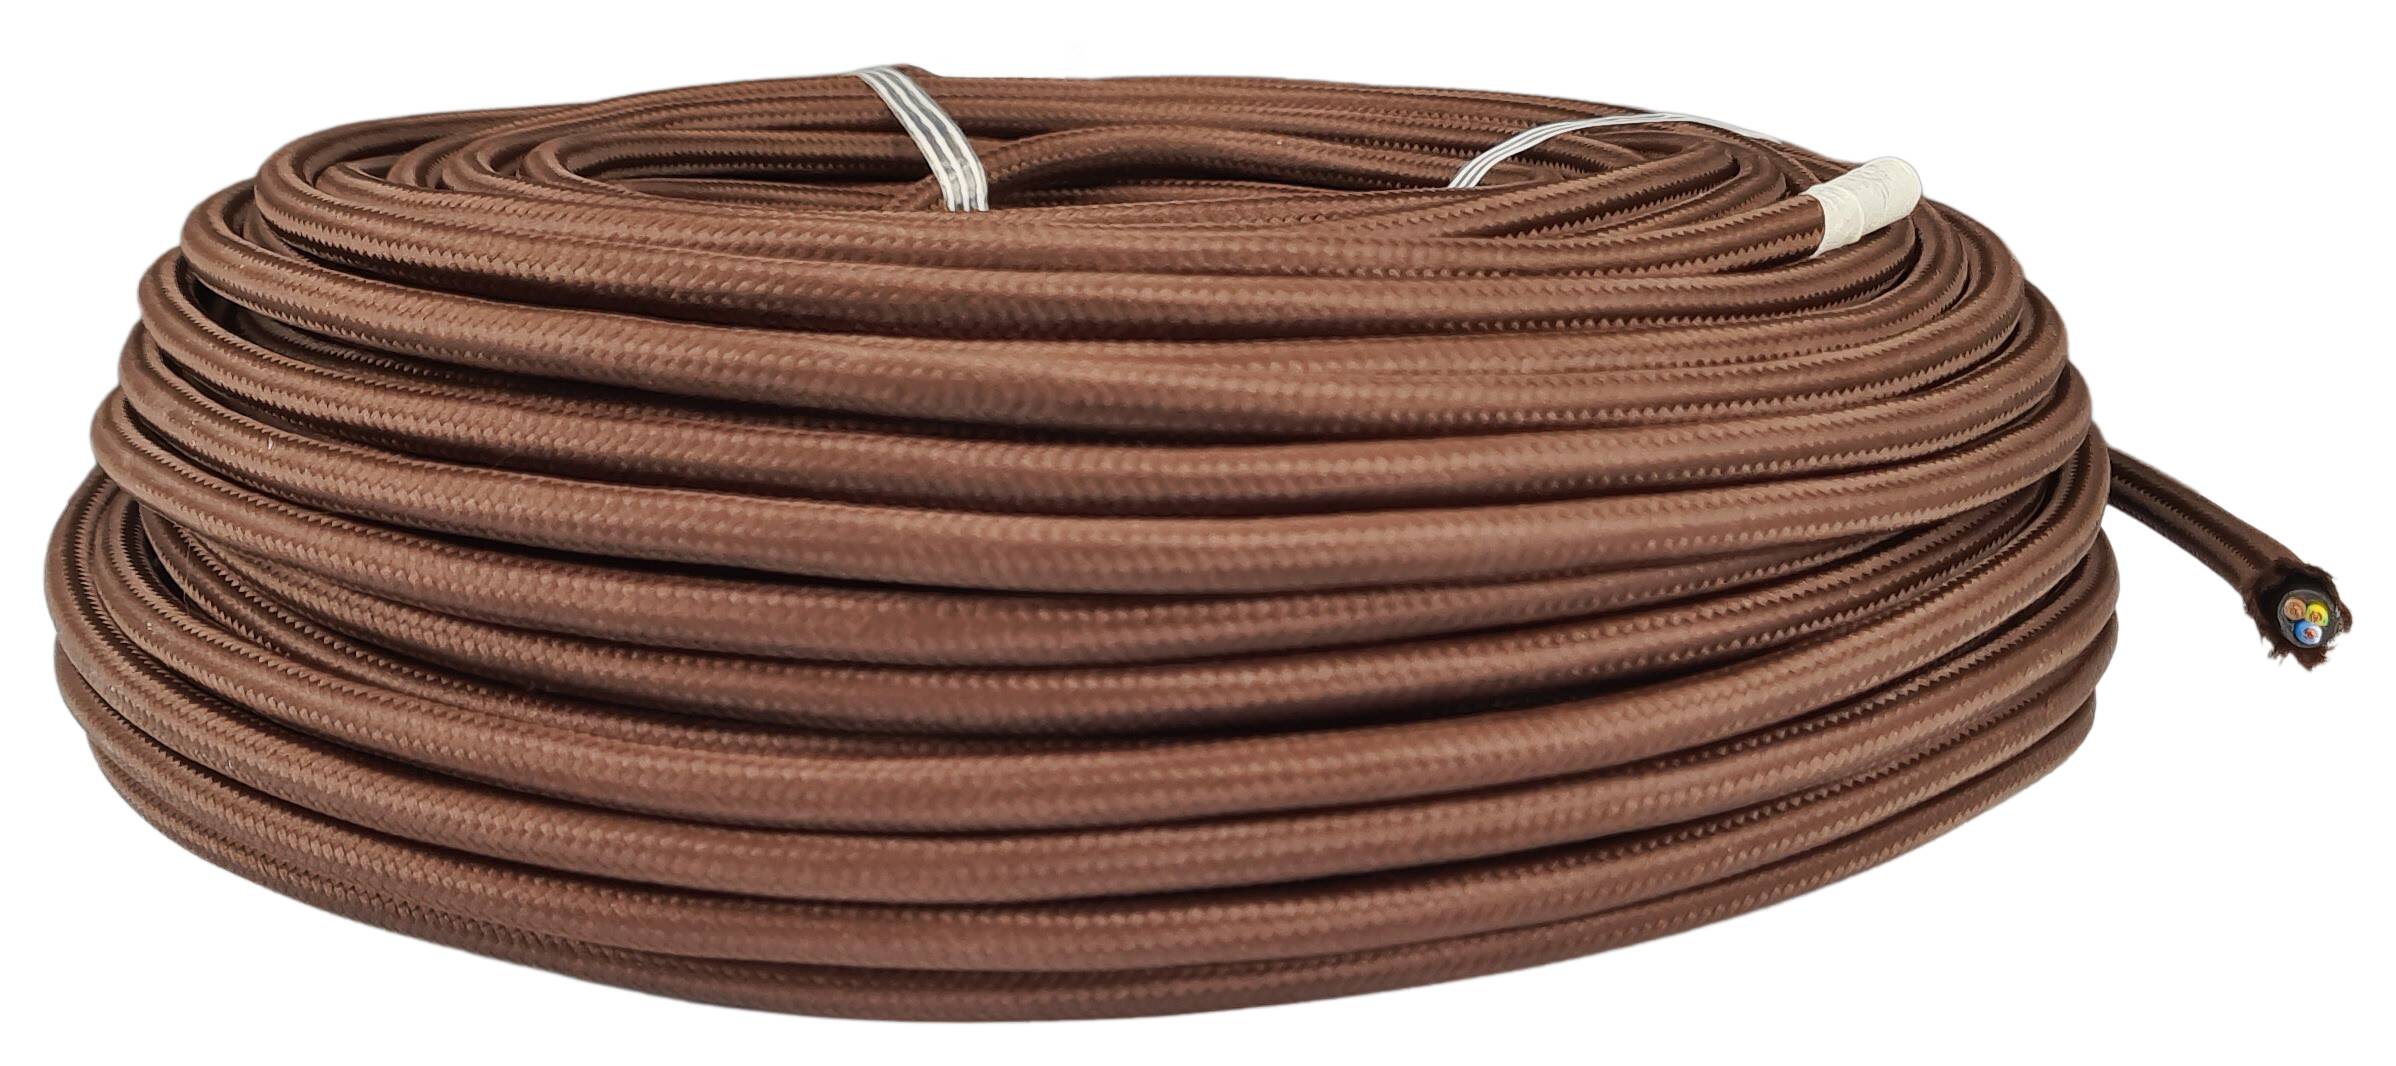 cable 3G 0,75 H03VV-F textile braided outside 6,3 mm RAL 8014 chocolate brown